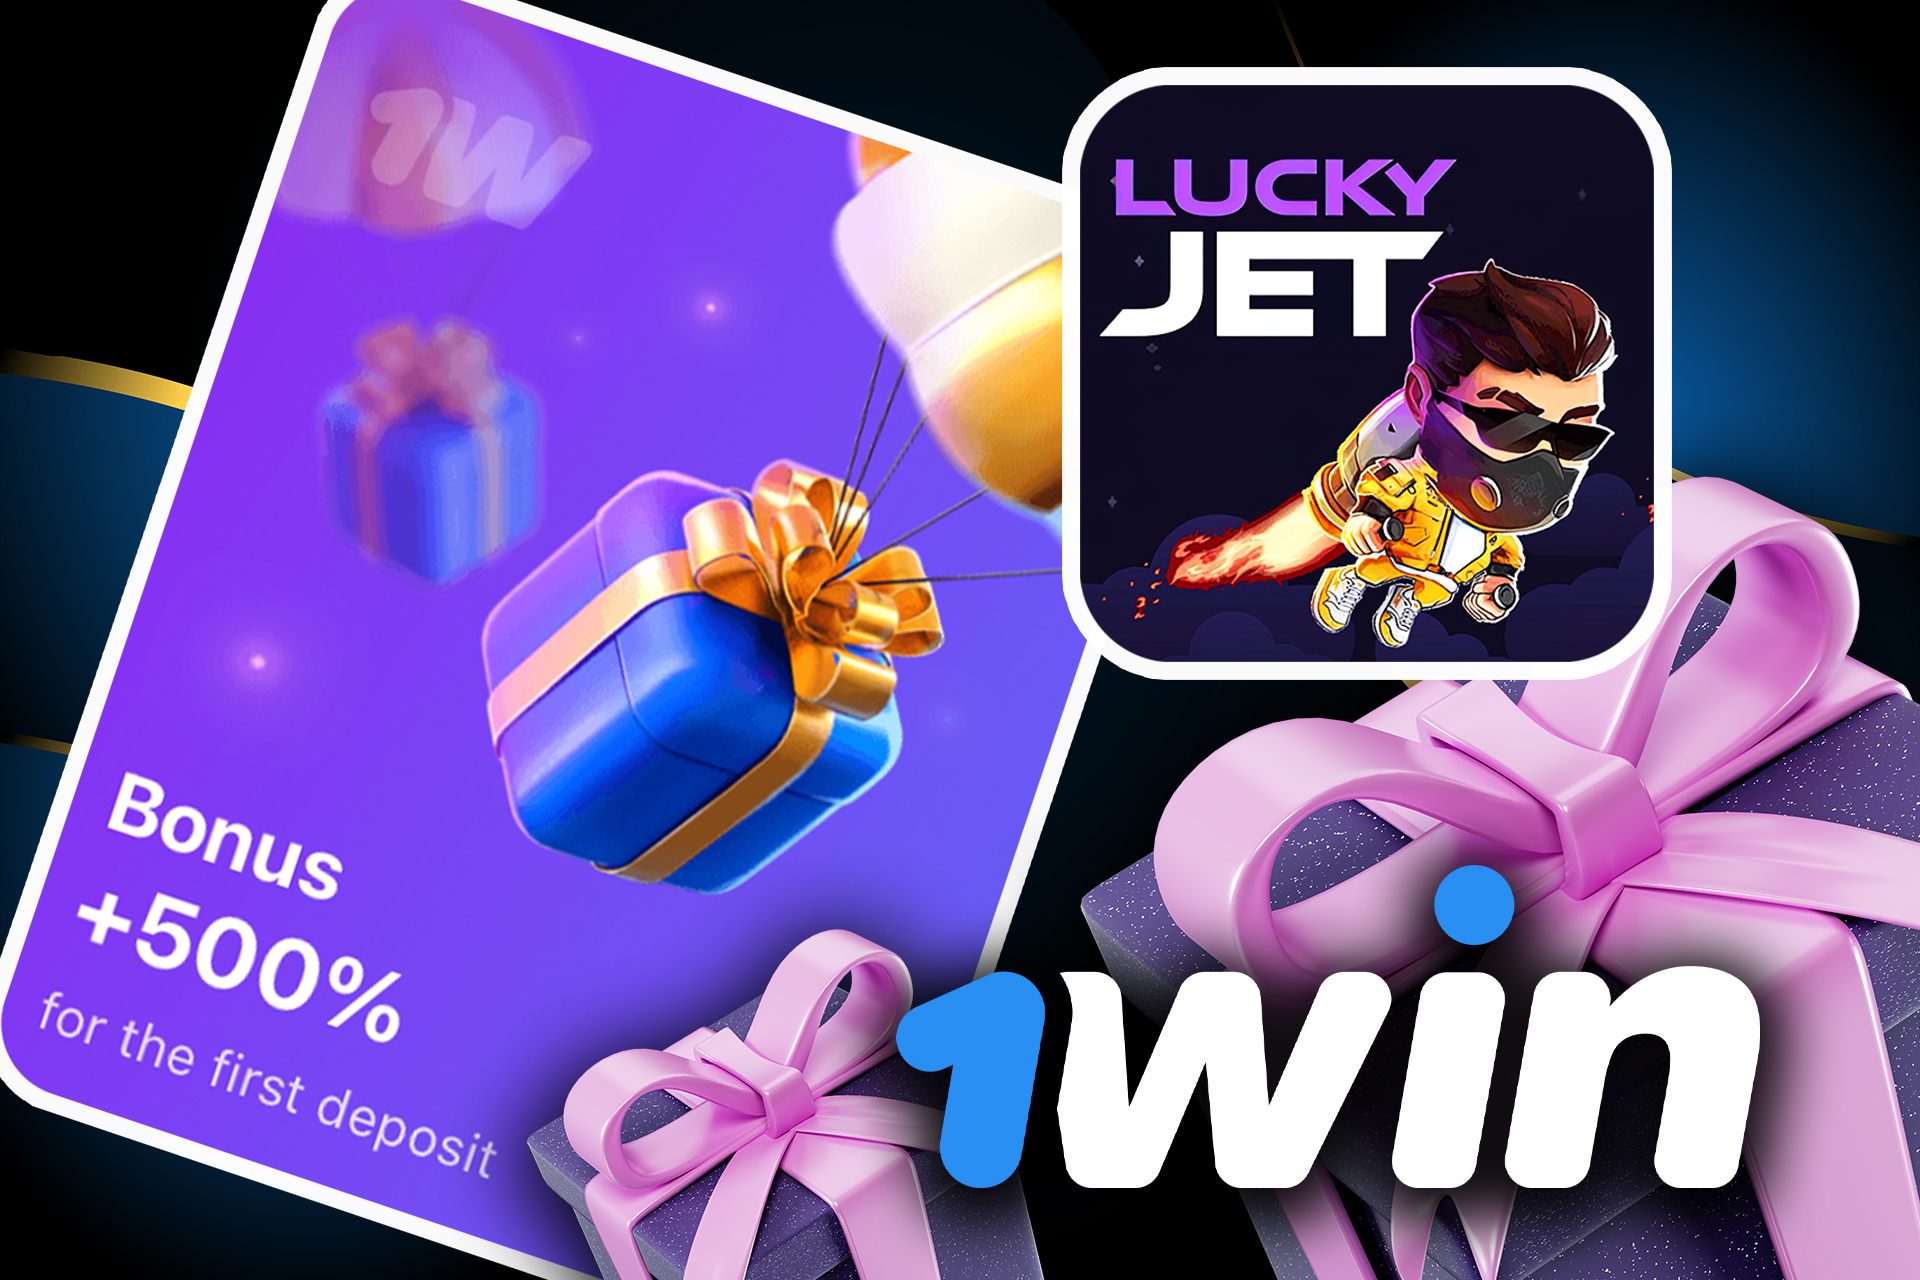 Get a 500% welcome bonus from 1win right after the first deposit.